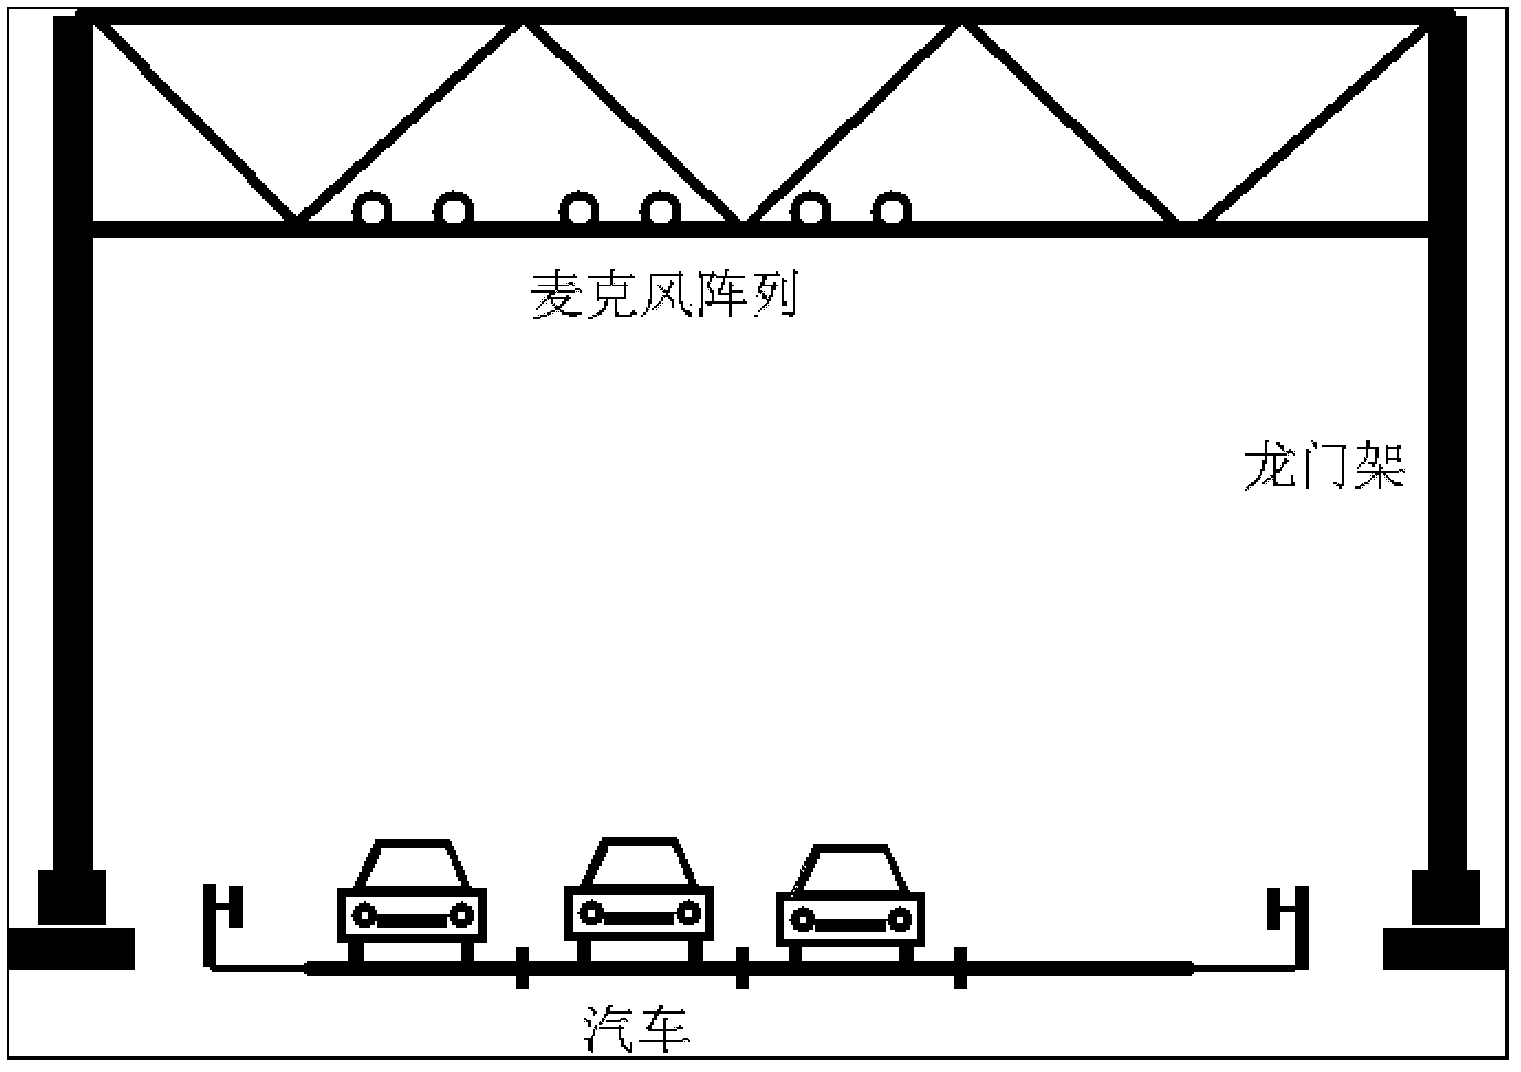 Expressway audio vehicle detection device and method thereof